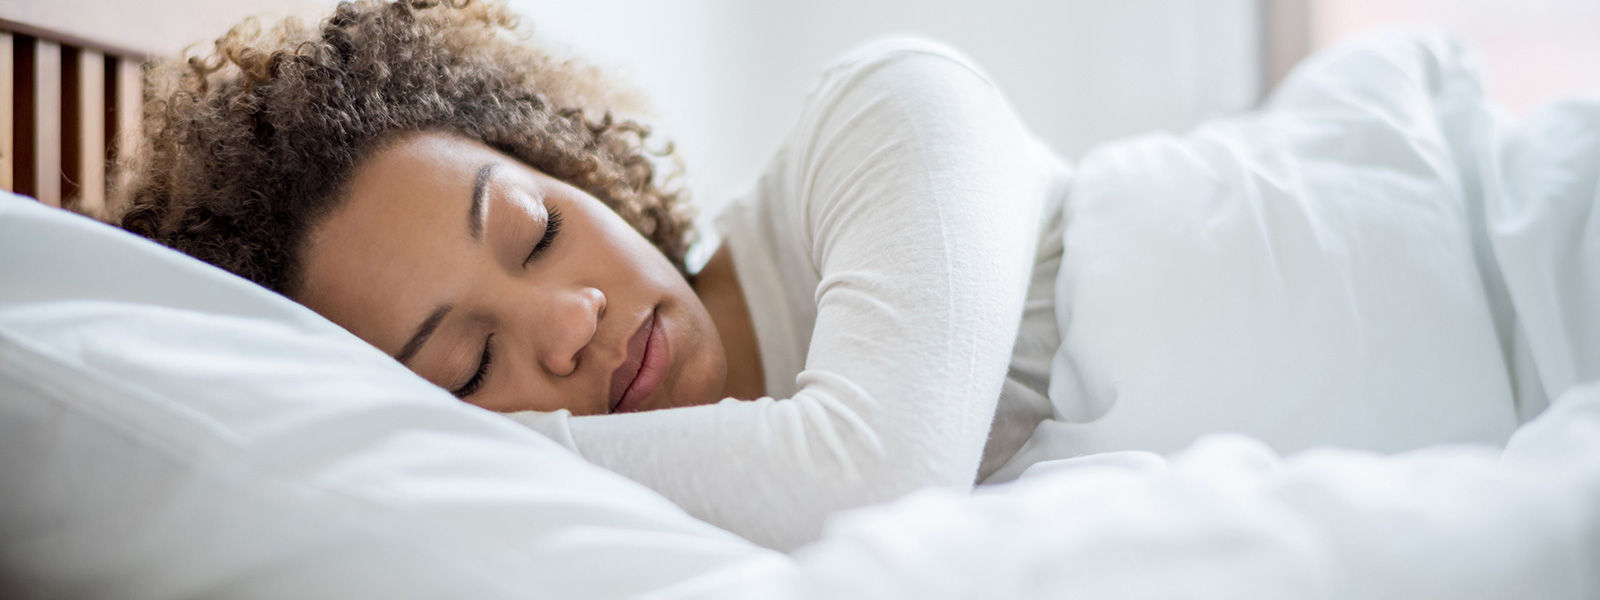 Sleep soundly knowing your mattress is supporting you correctly throughout the night 